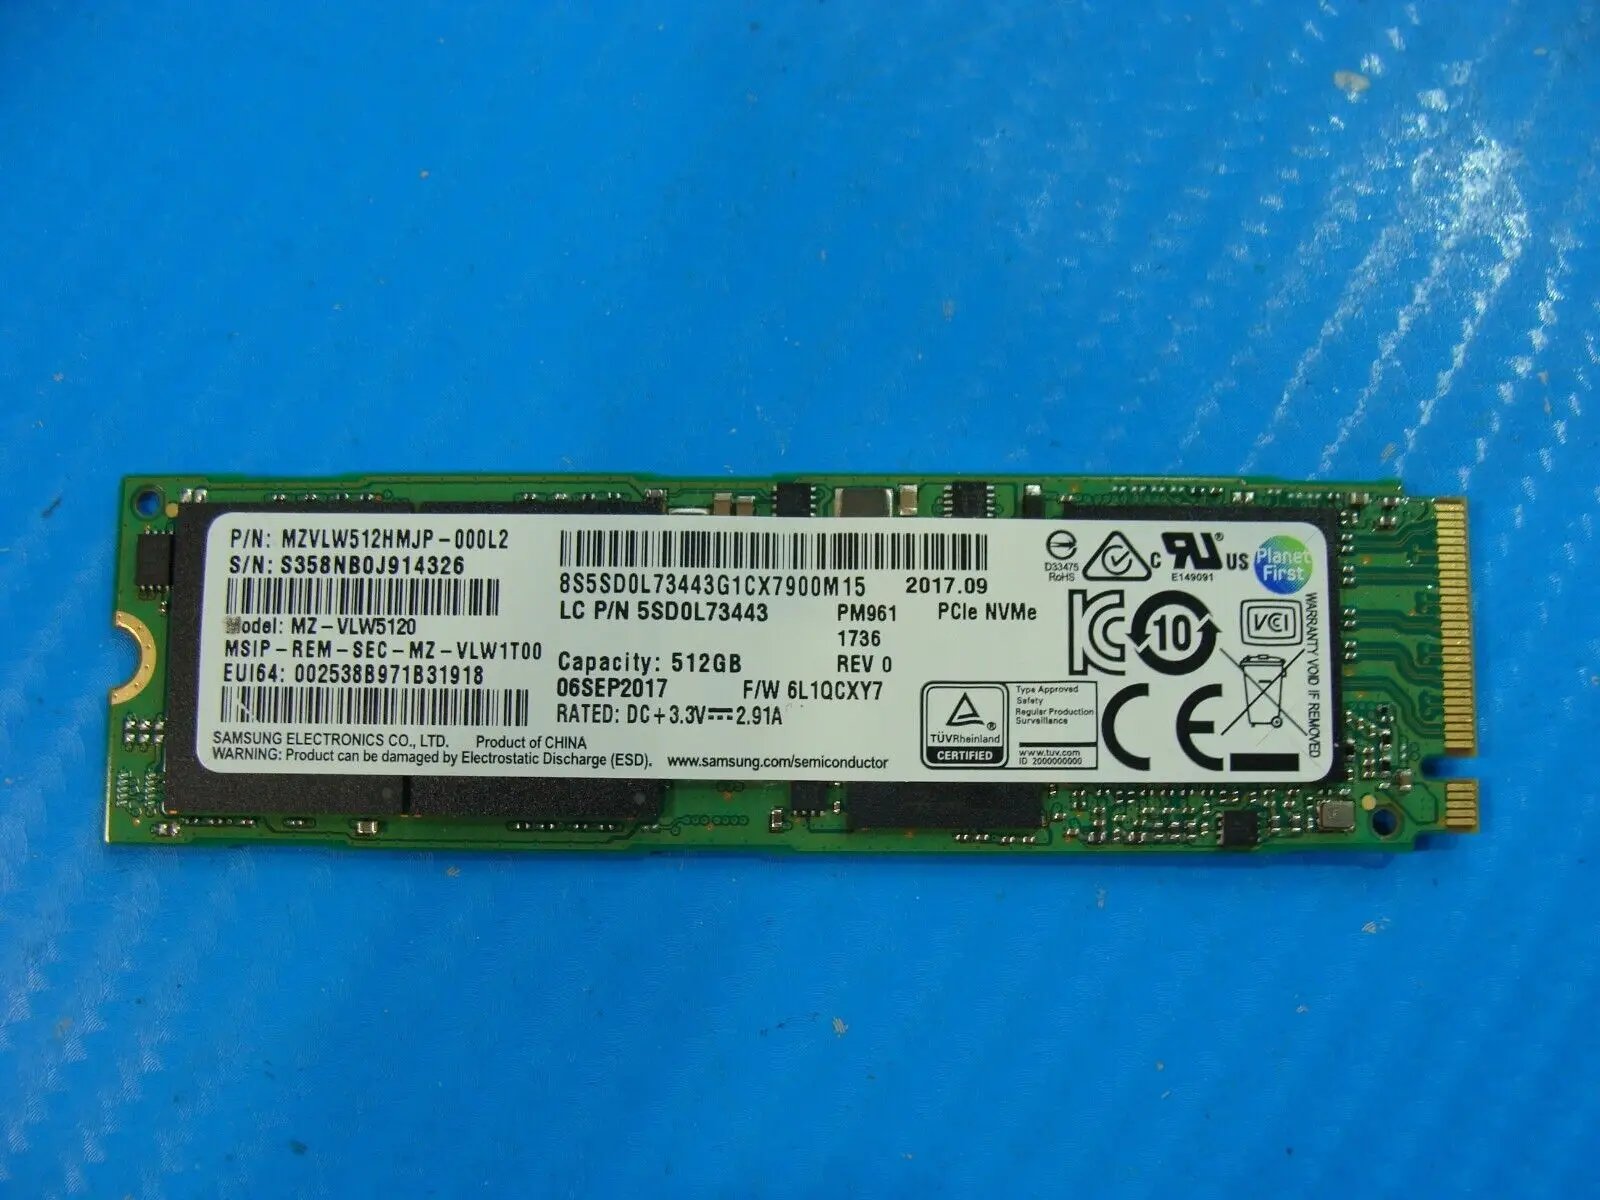 Acer AN517-51-56YW Samsung 512GB NVMe M.2 SSD Solid State Drive MZ-VLW5120